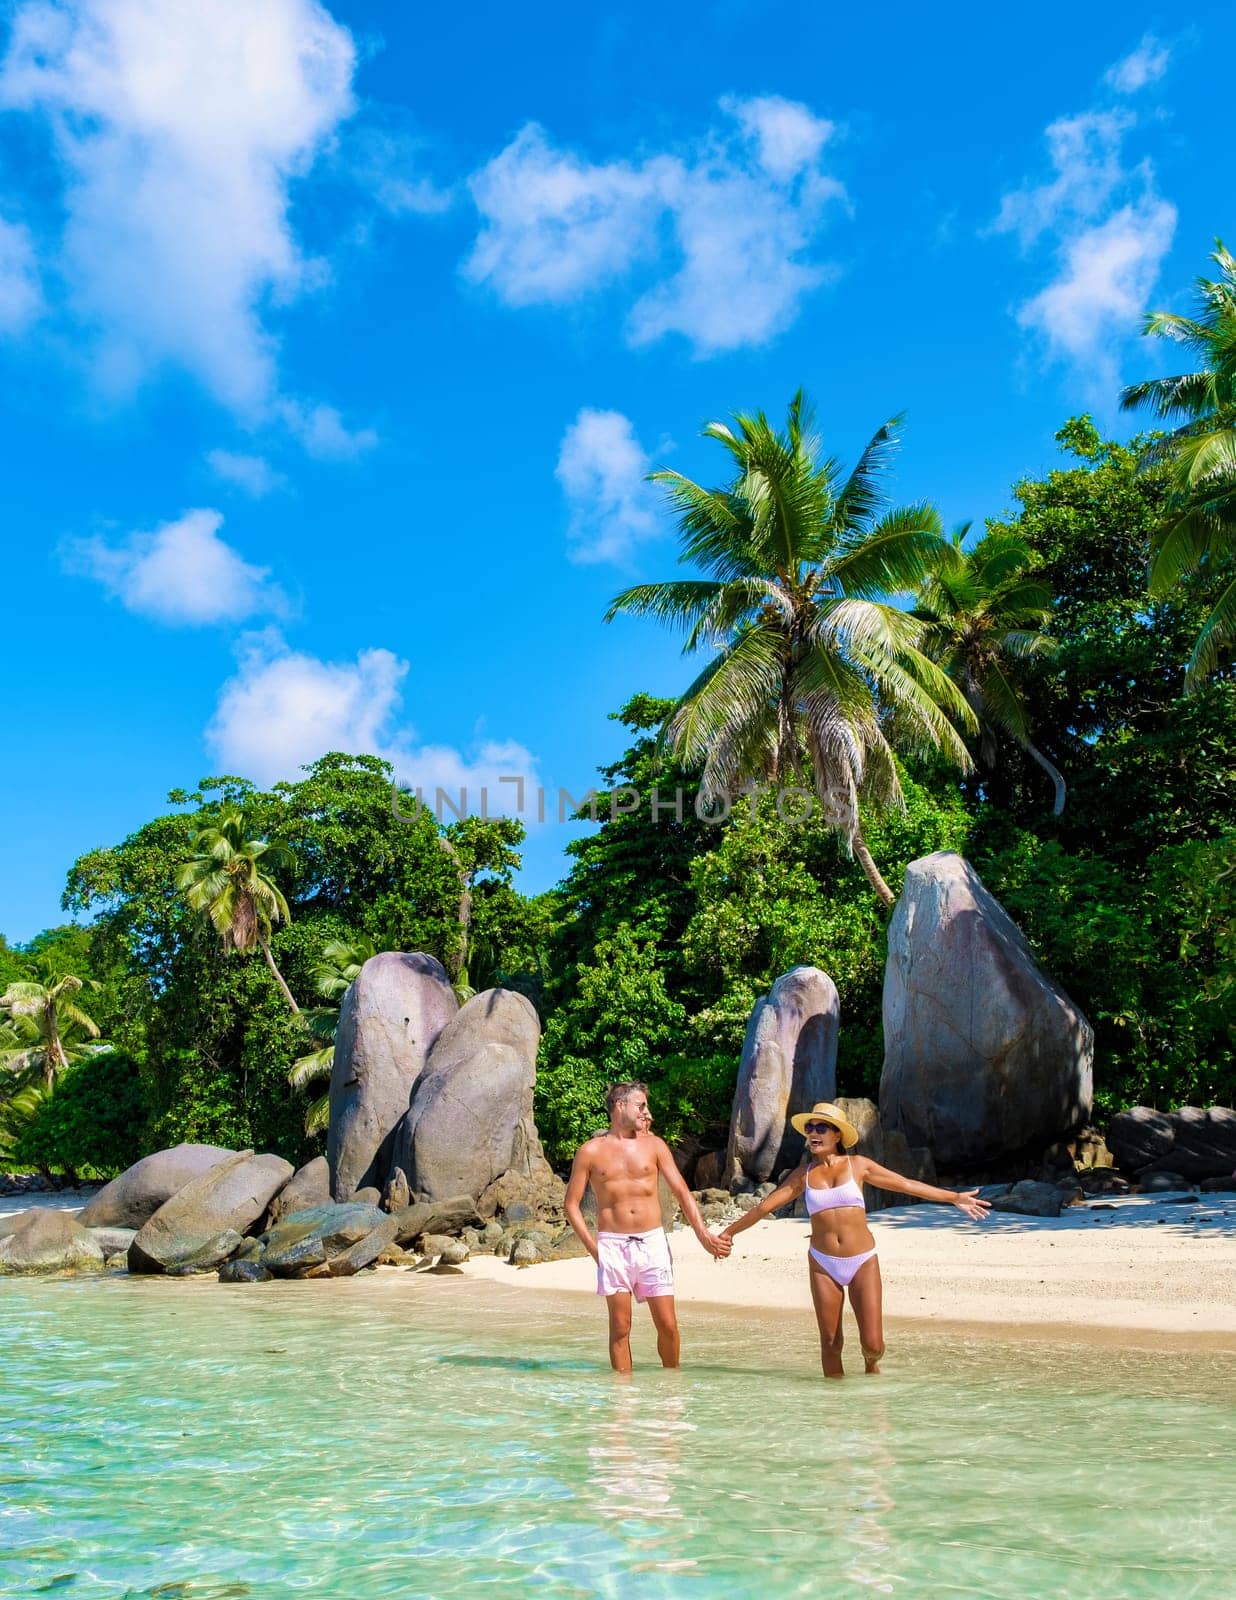 Anse Royale beach, a couple of men and women on vacation in Seychelles walking at the beach, Mahe Seychelles tropical beach with palm trees and a blue ocean